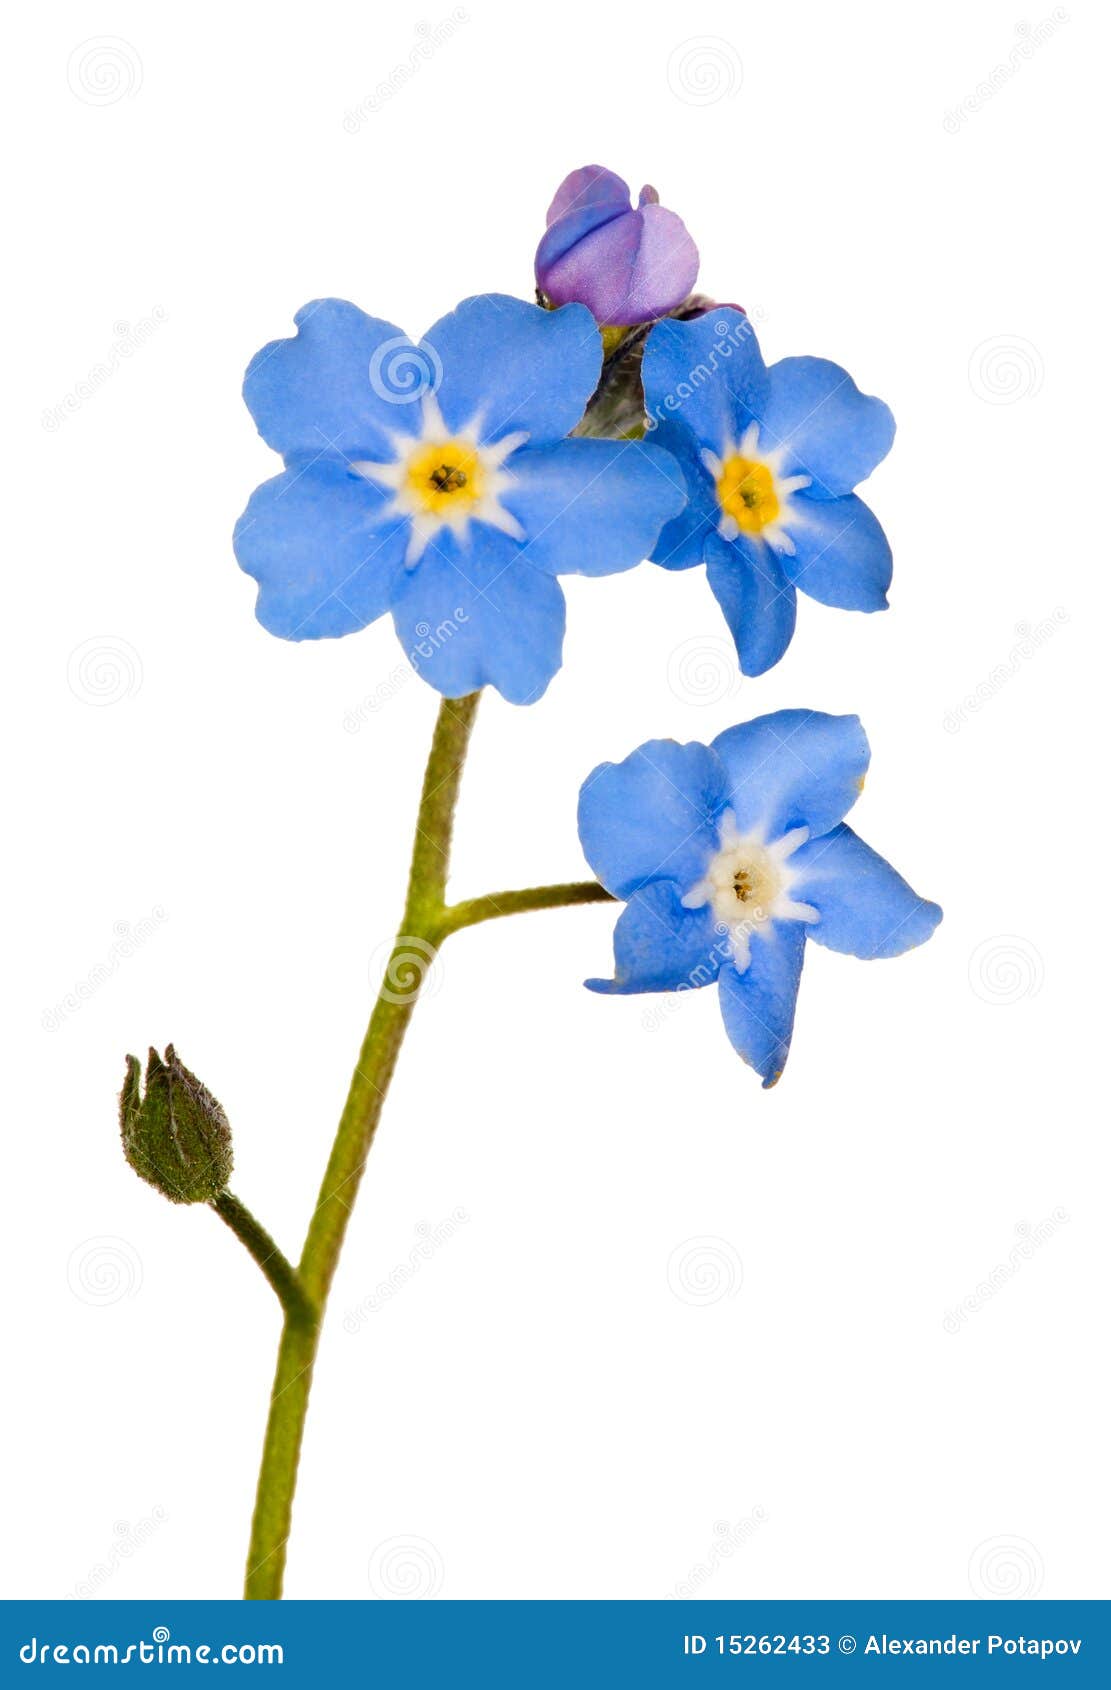 forget-me-not single flower on white